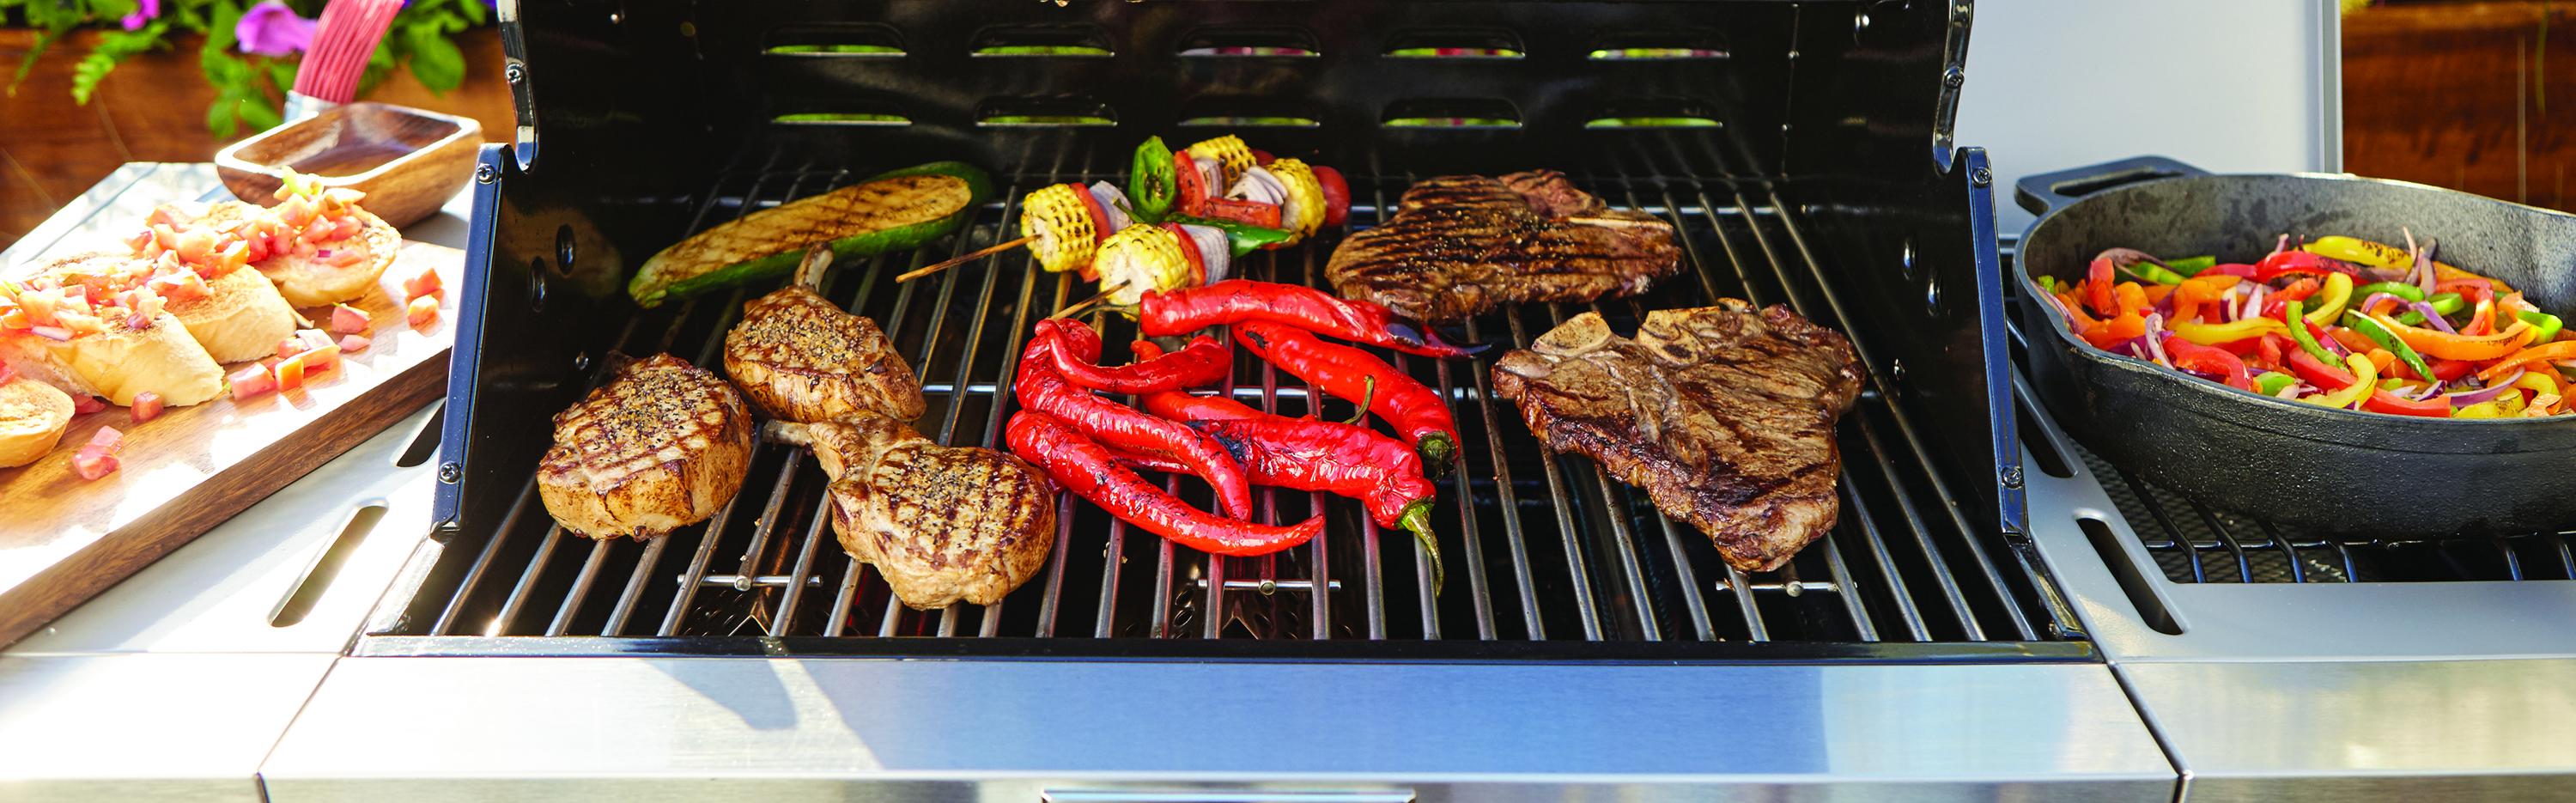 Grilling accessories from The Home Depot